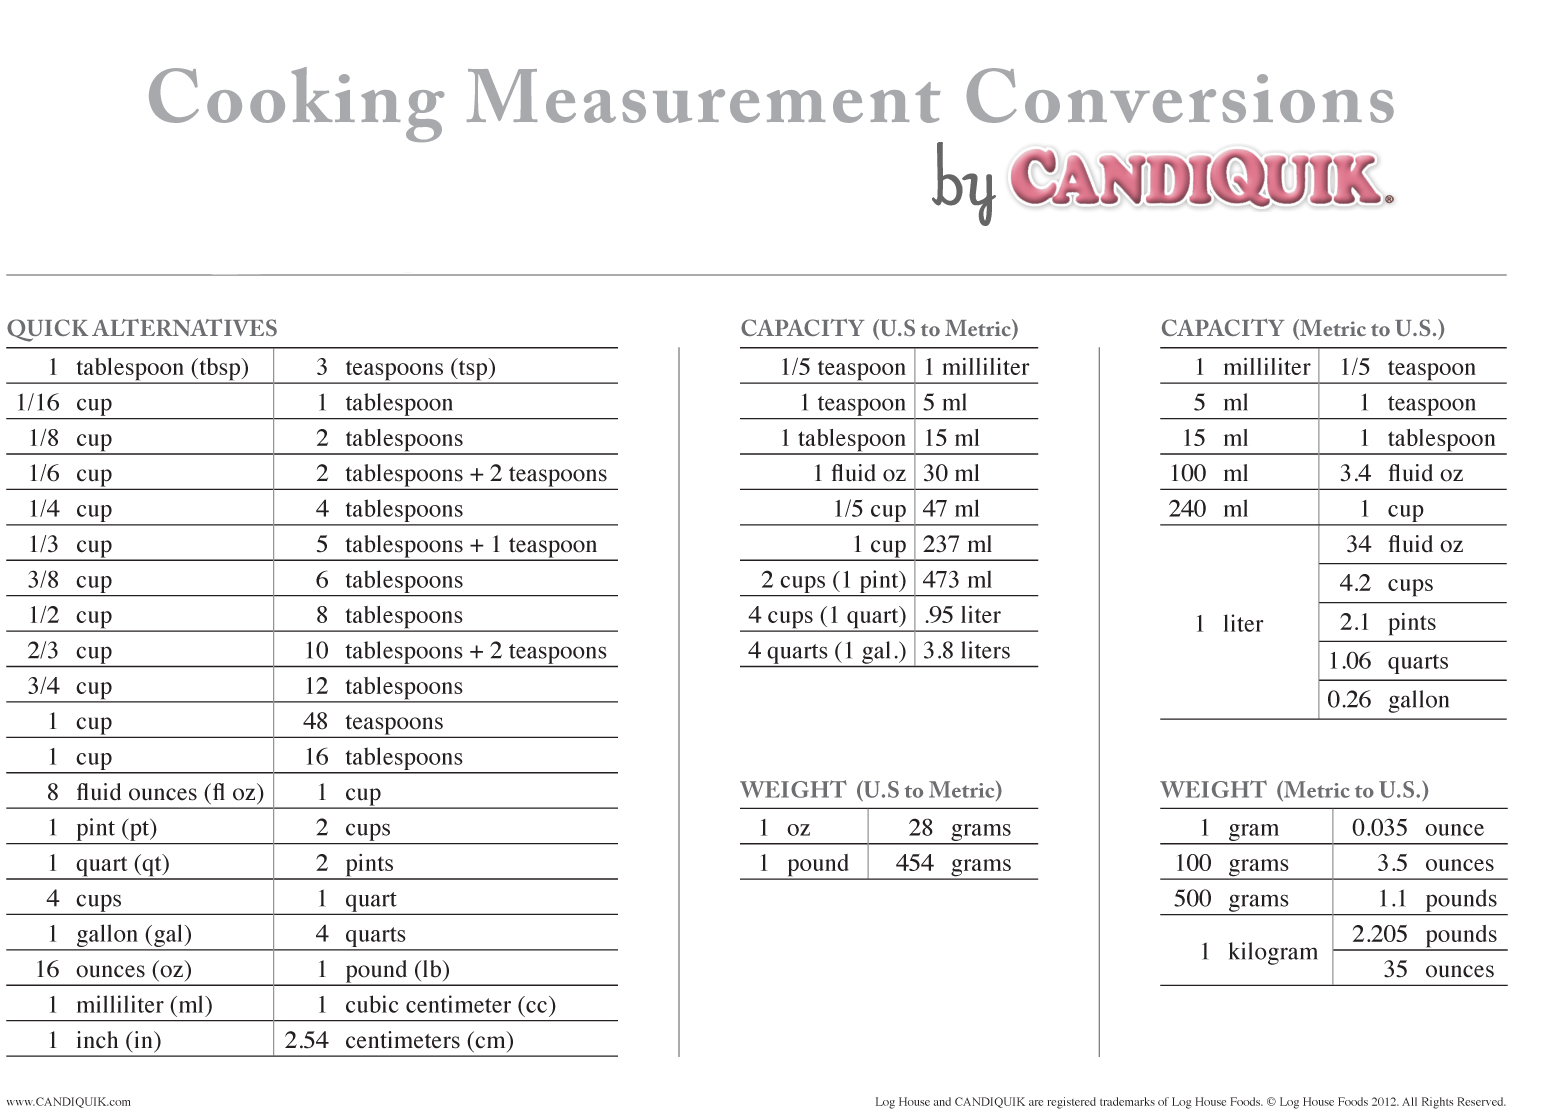 7-best-images-of-measurement-poster-printable-free-printable-cooking-conversion-chart